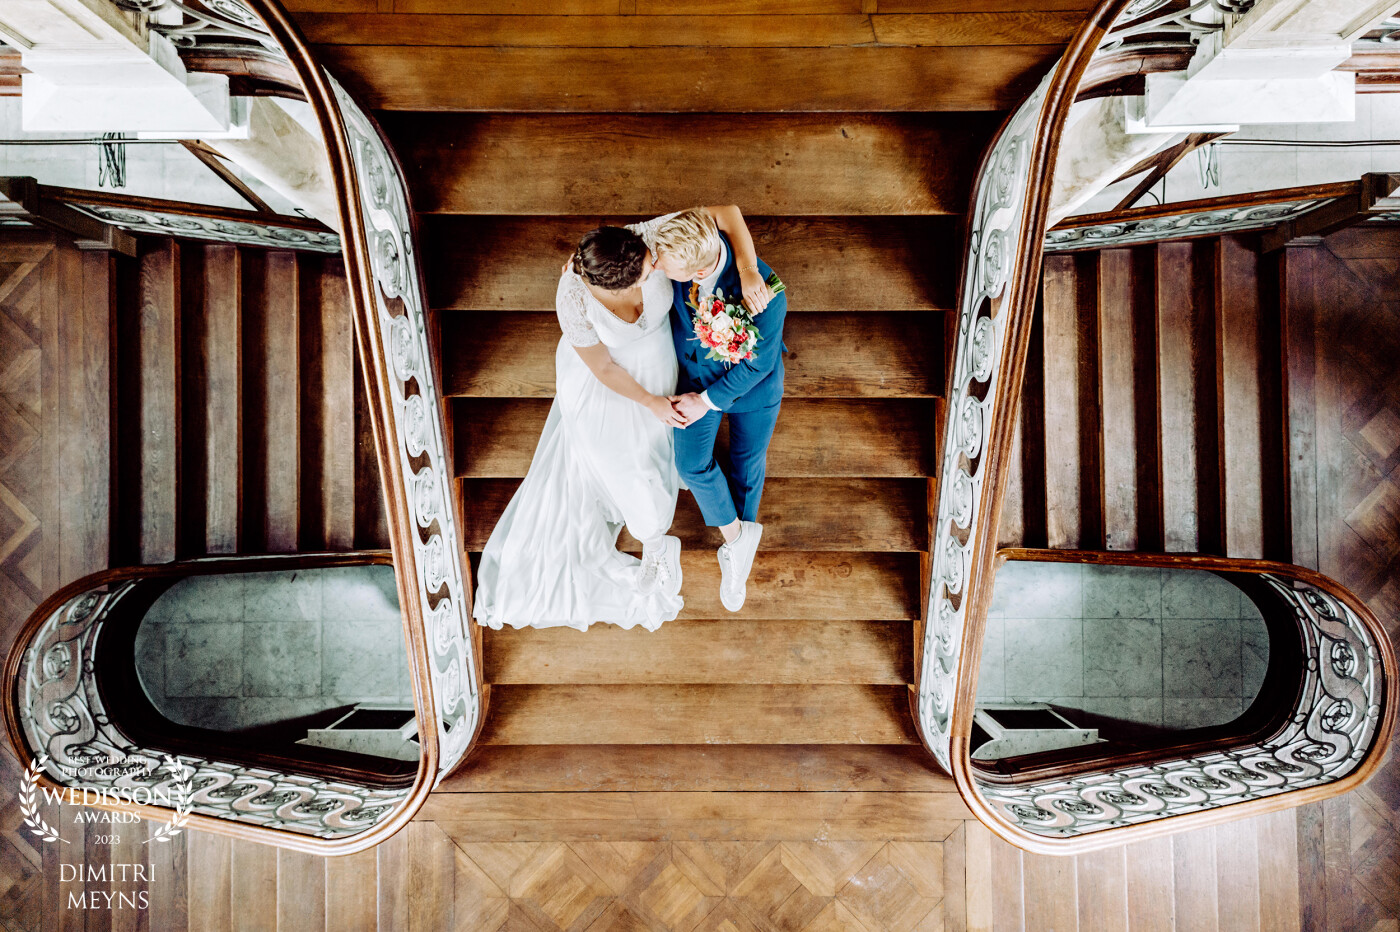 Célèstine and Brecht got married this summer, but they agreed to another after wedding shoot. This photoshoot took place in the beautiful blue castle. The stairs were perfect for a symmetrical shot.